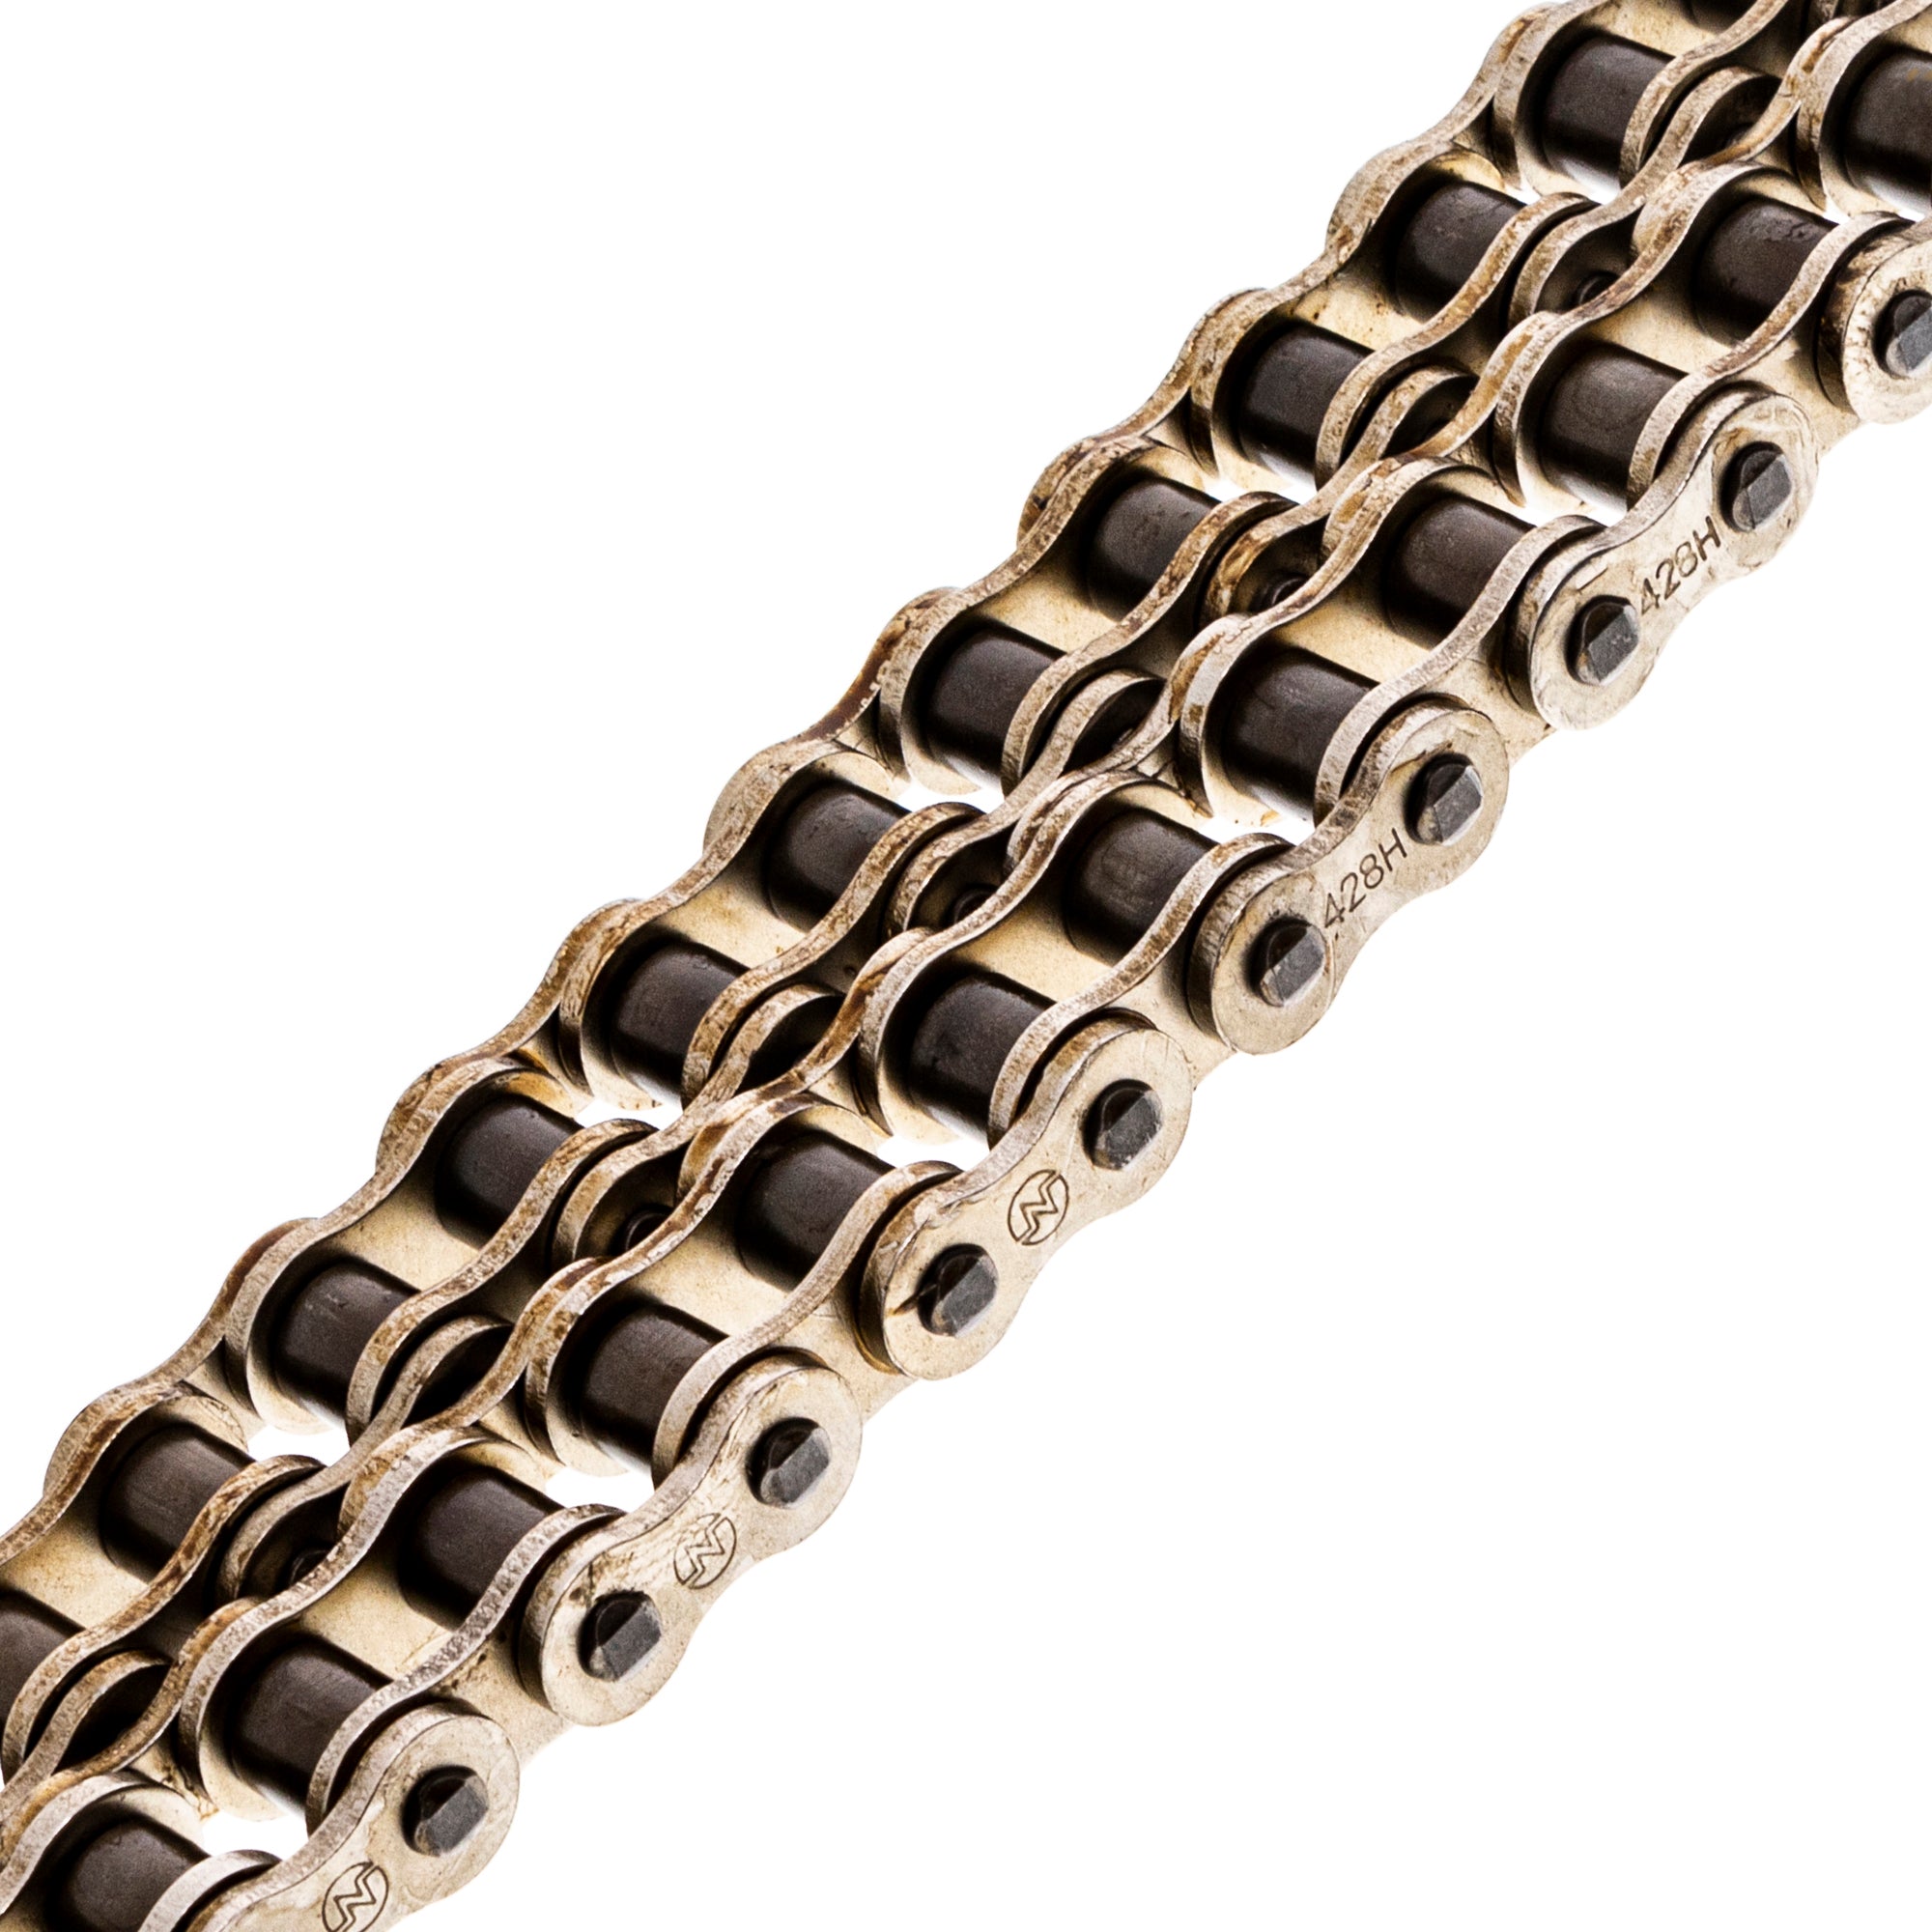 Drive Chain 92 Standard Non O-Ring w/ Master Link for zOTHER FourTrax ATC125M ATC110 5188 NICHE 519-CDC2299H